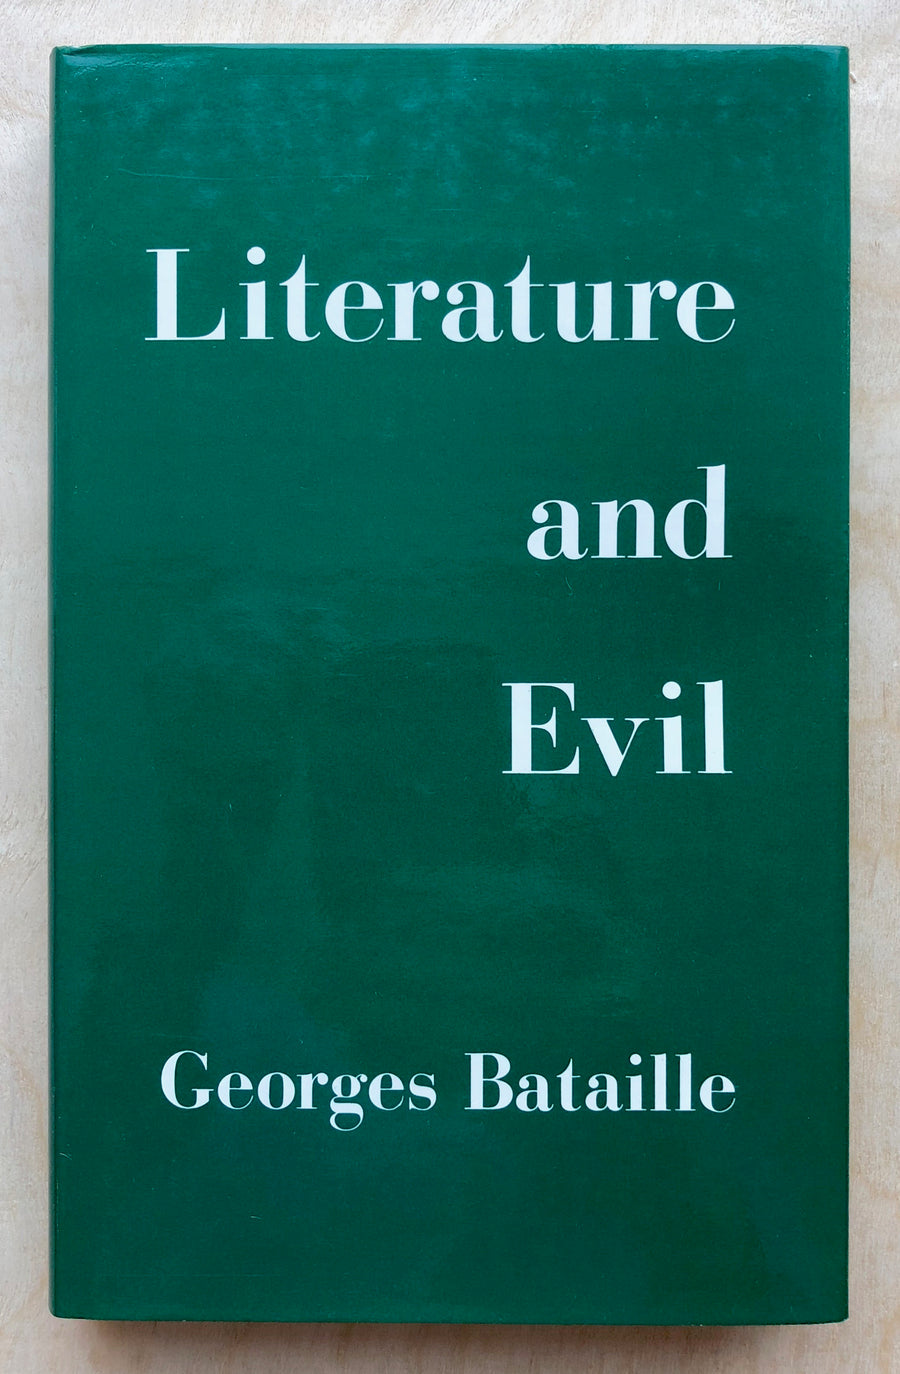 LITERATURE AND EVIL: by Georges Bataille